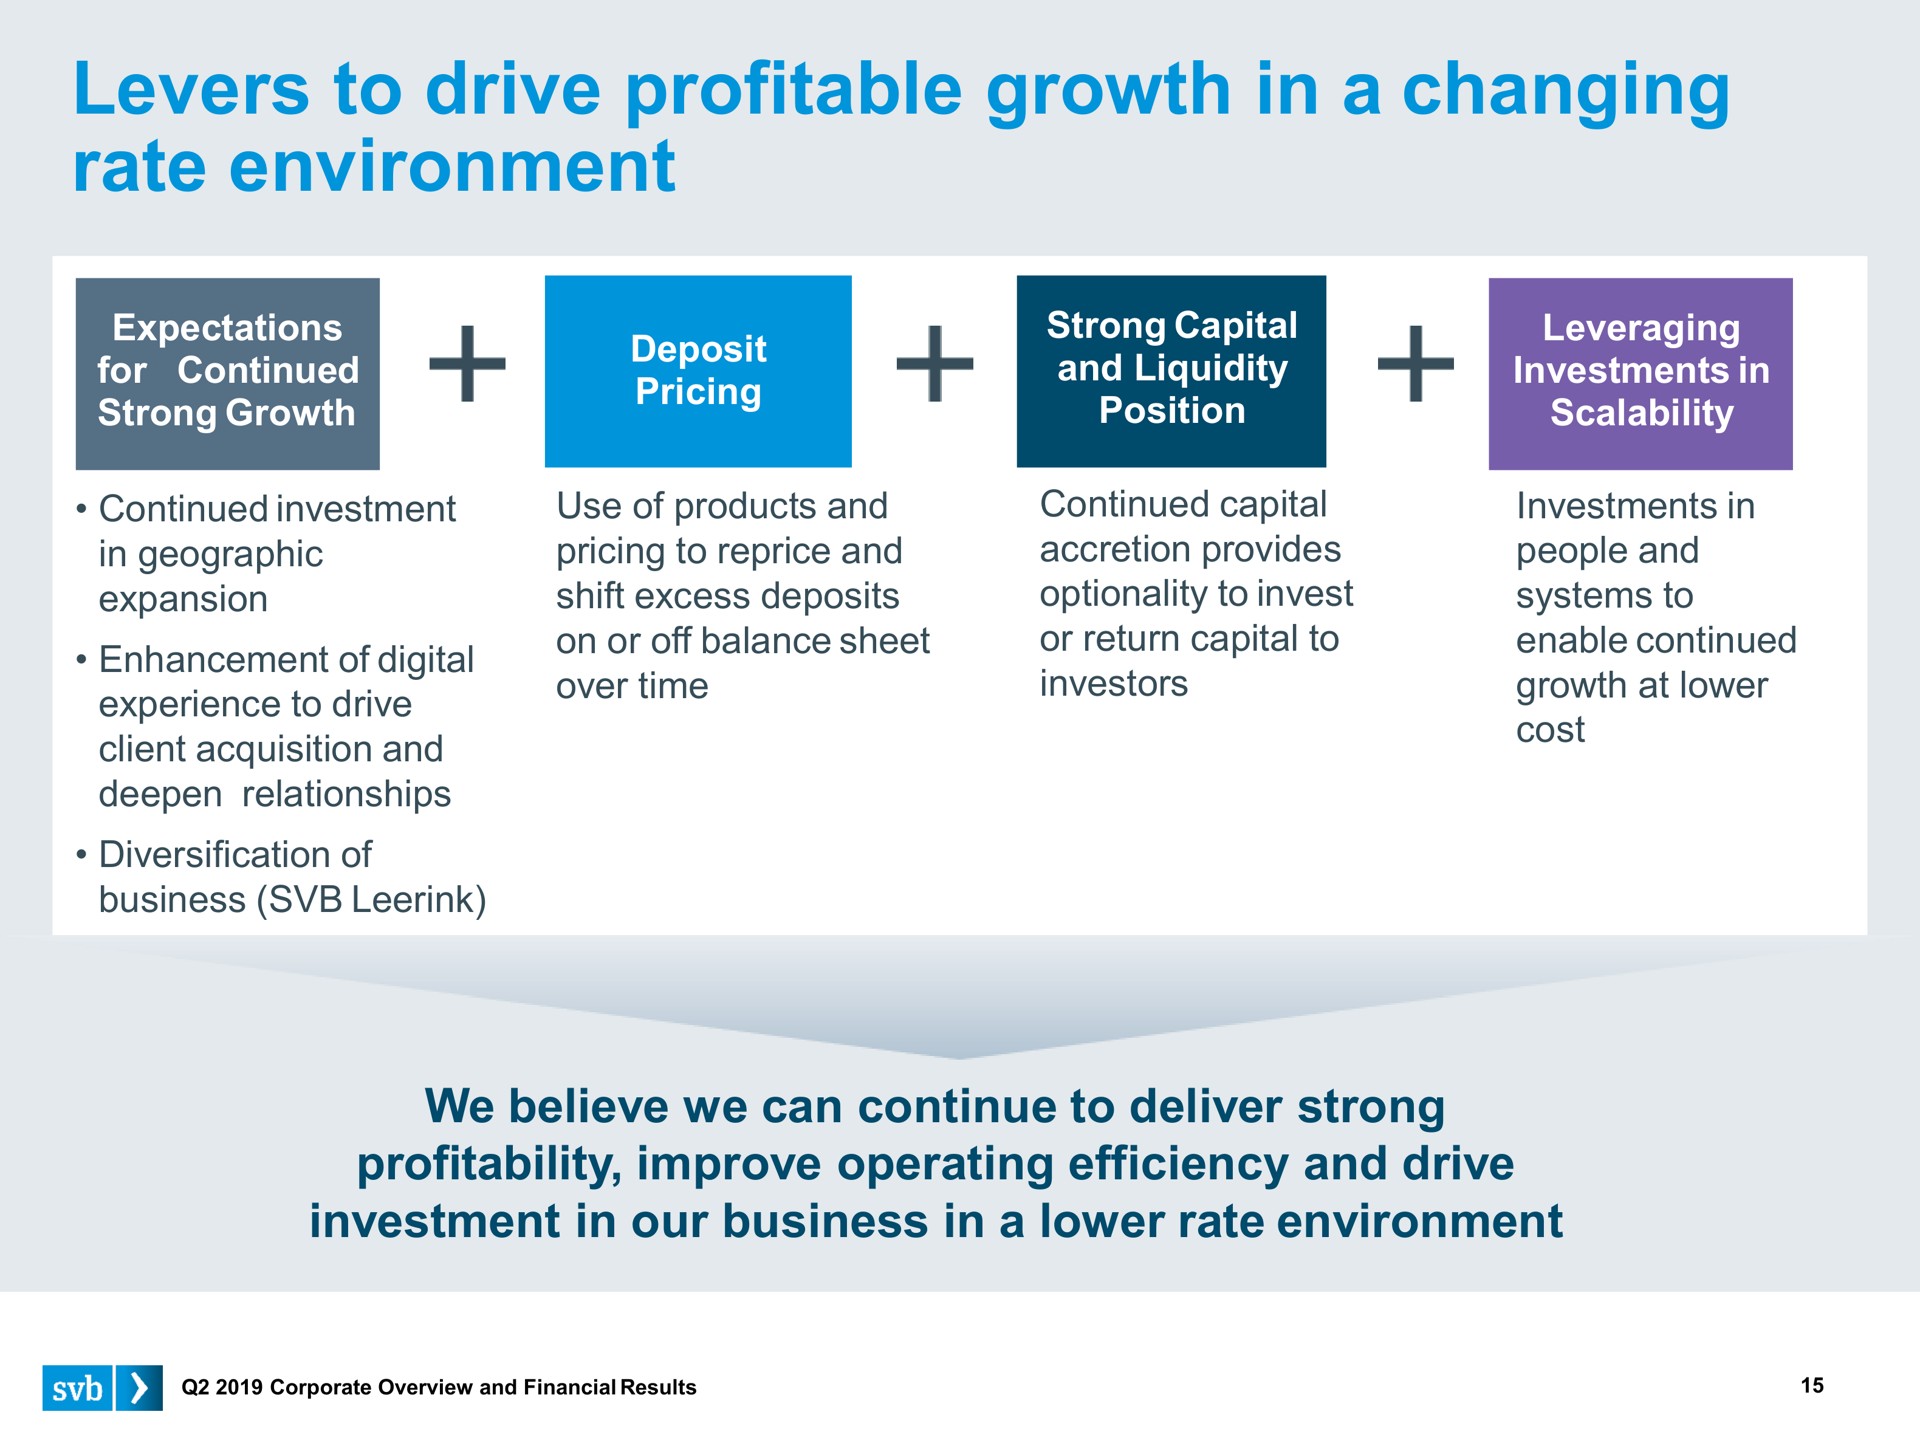 levers to drive profitable growth in a changing rate environment | Silicon Valley Bank